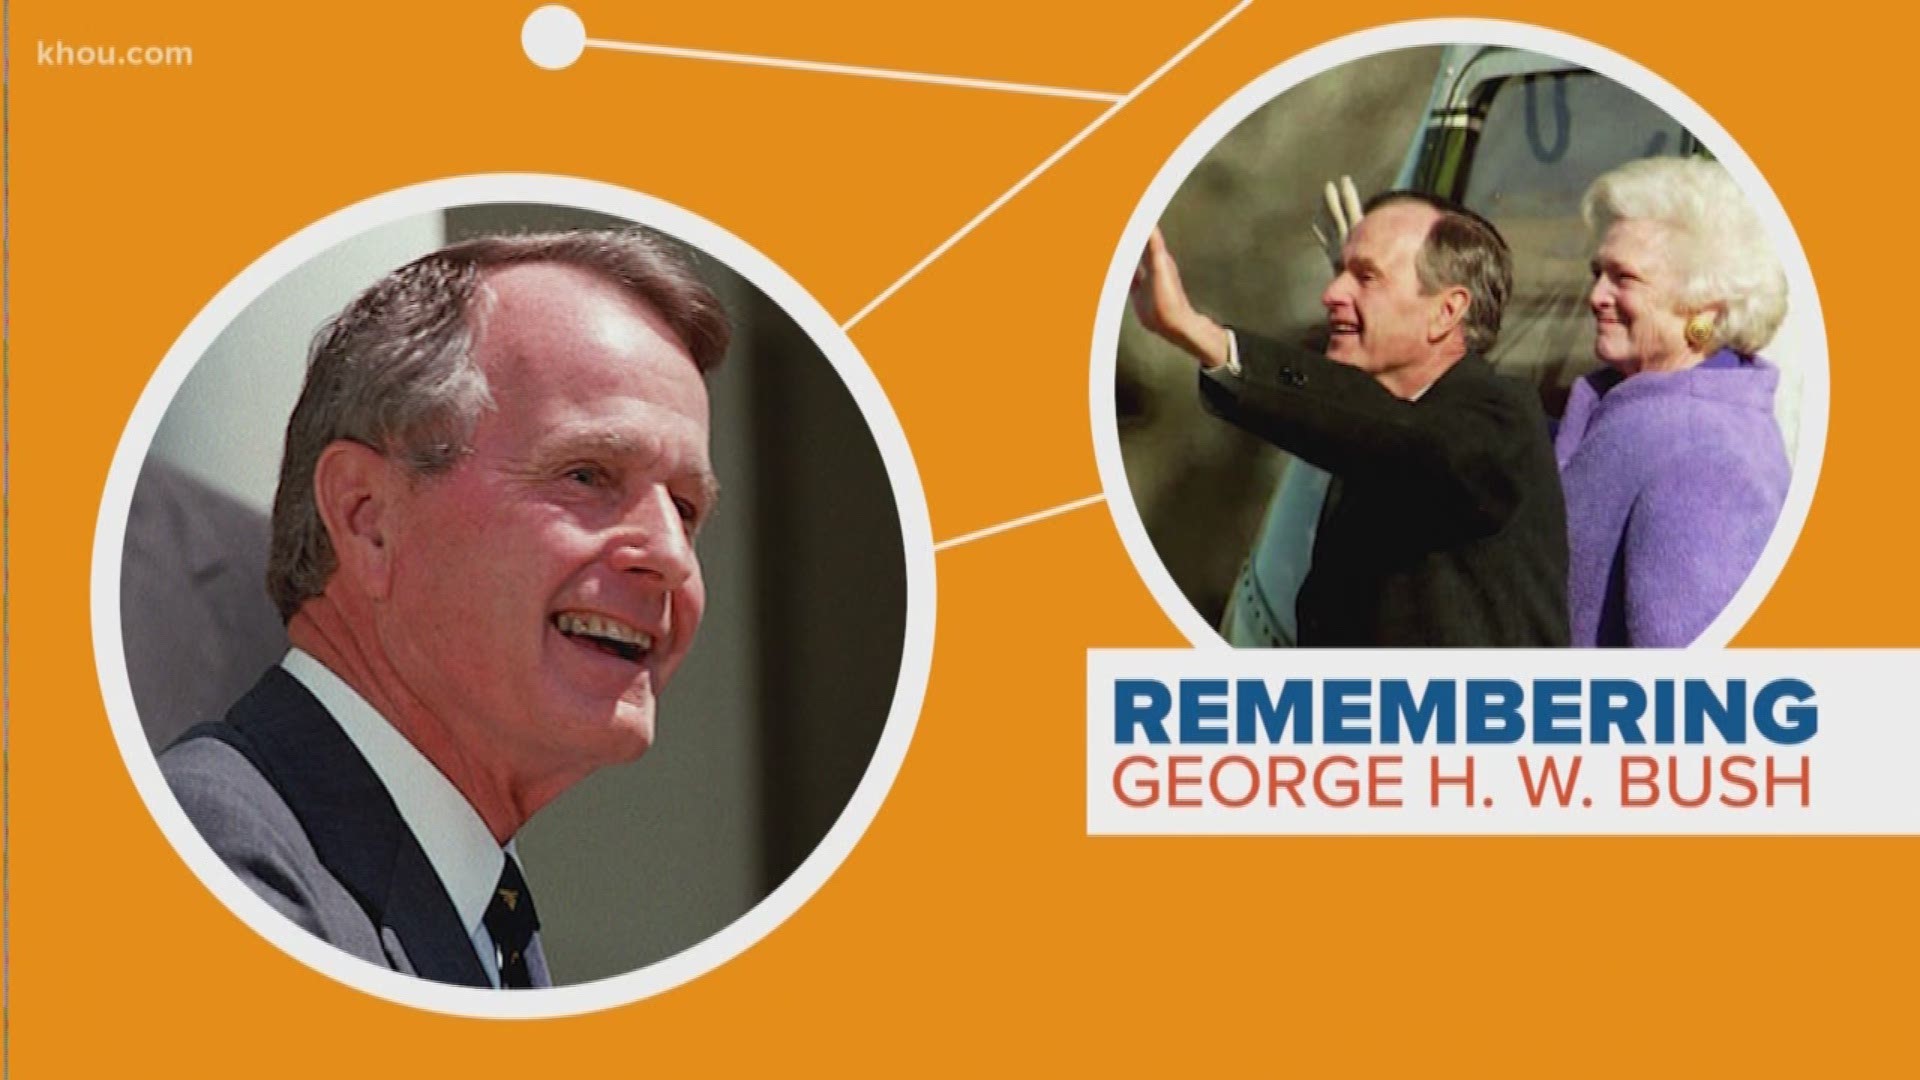 President George H.W. Bush served just one term, but he left a lasting impact in those four years. Ron Trevino connects the dots on his presidency and what made it such a key part of our nation's history.